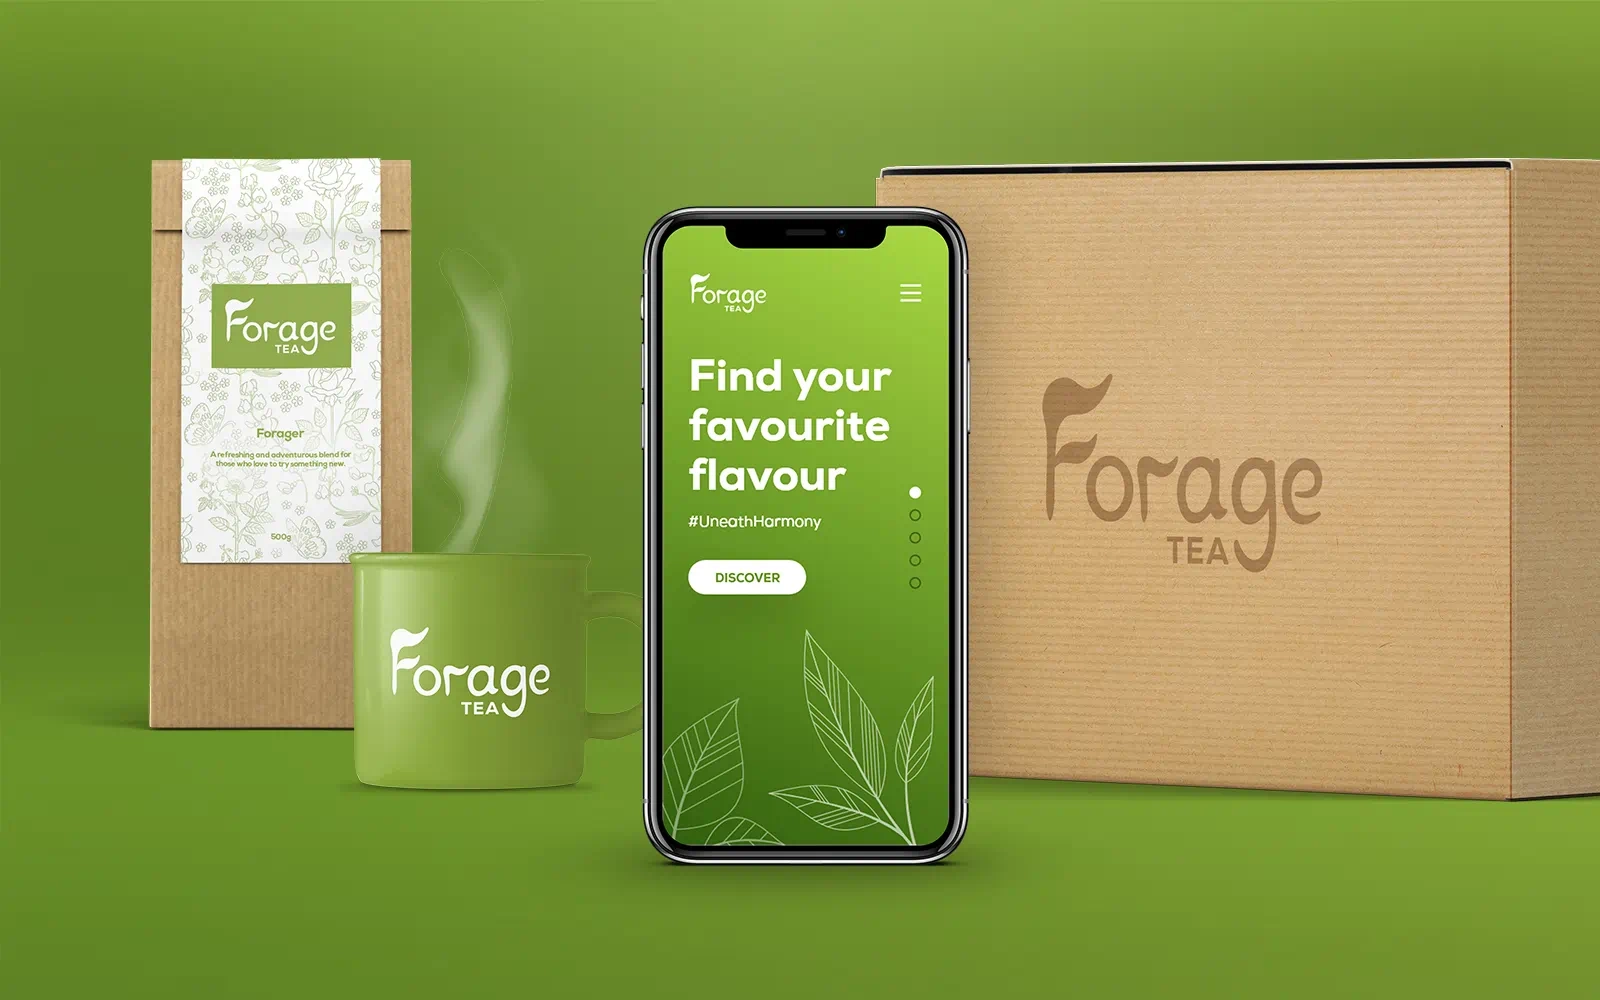 On a plain, green background is a mobile showing a mockup of the Forage Tea website. Next to it are some packaging mockups